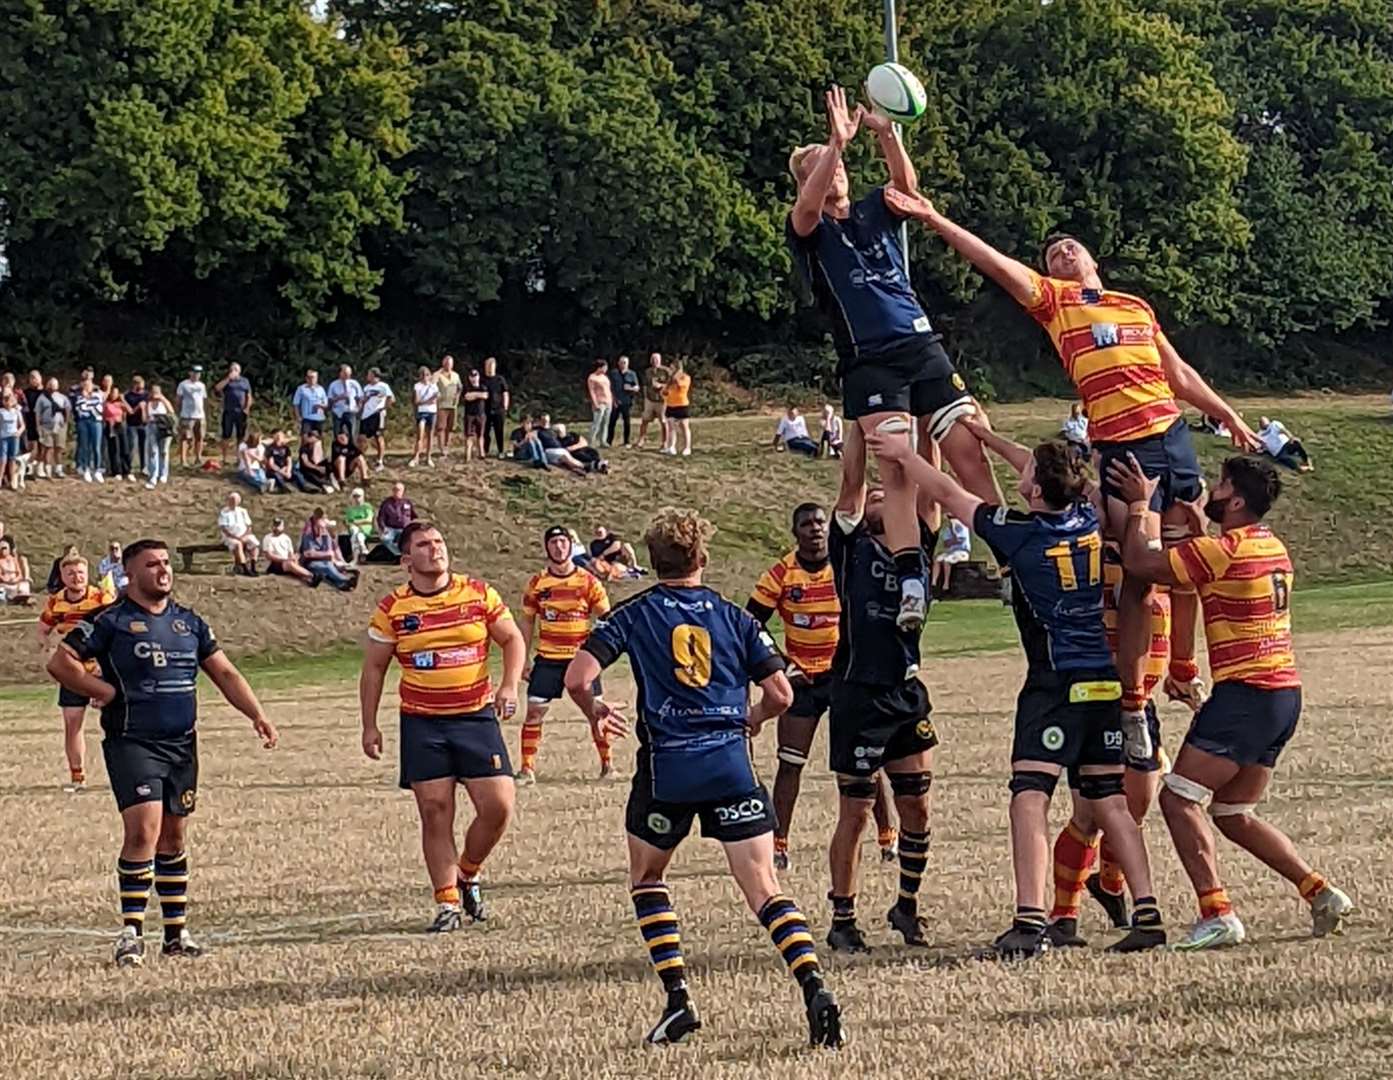 Match action between Medway and Hertford.